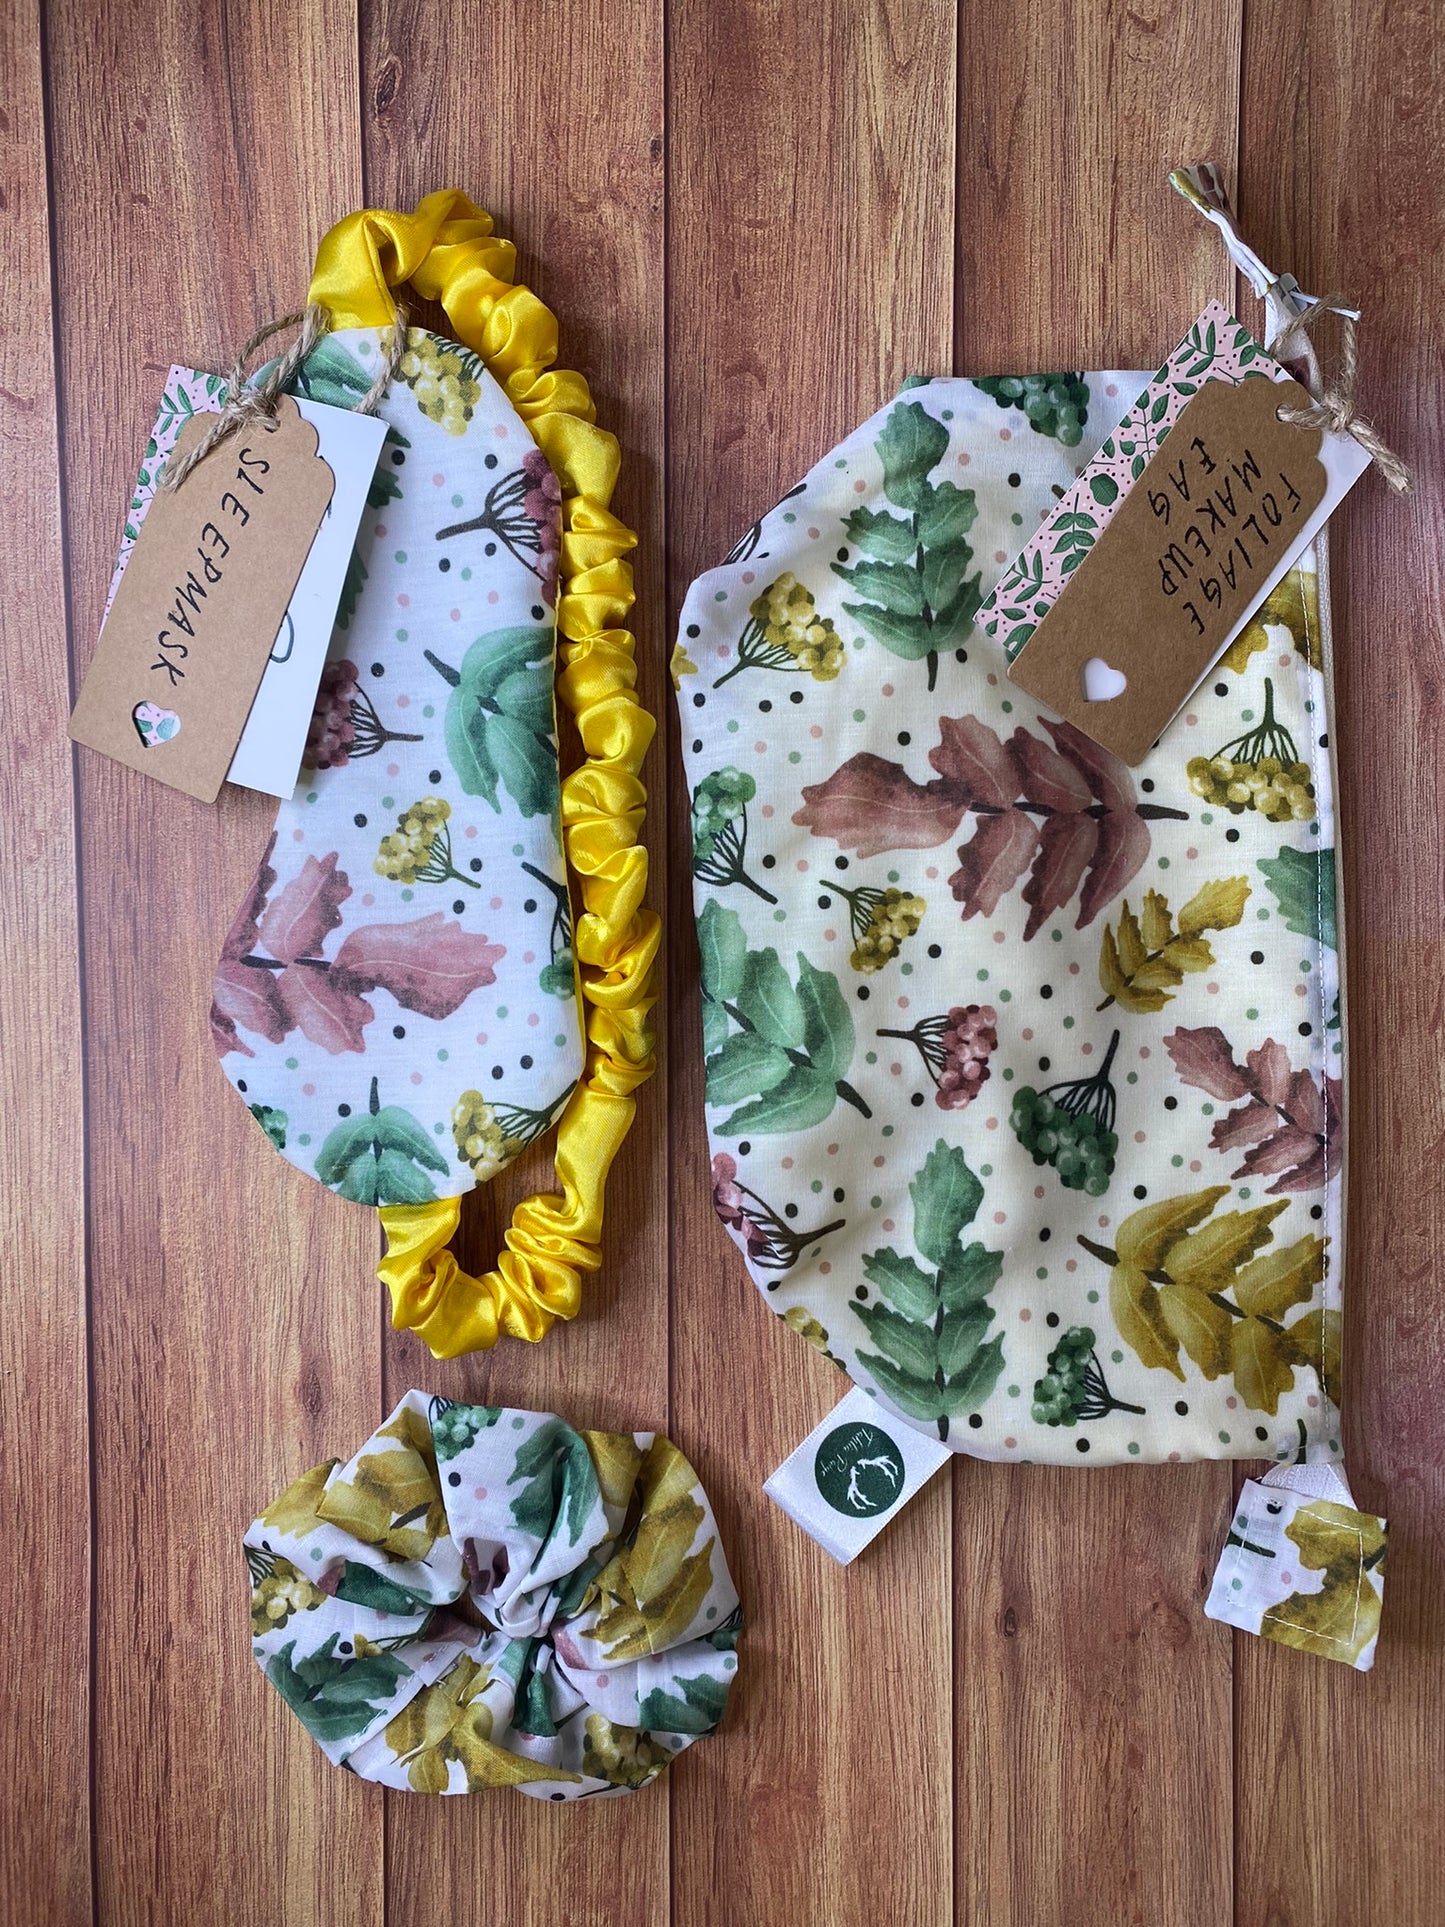 pretty foliage giftset including makeup bag, sleepmask and scrunchie on wooden background